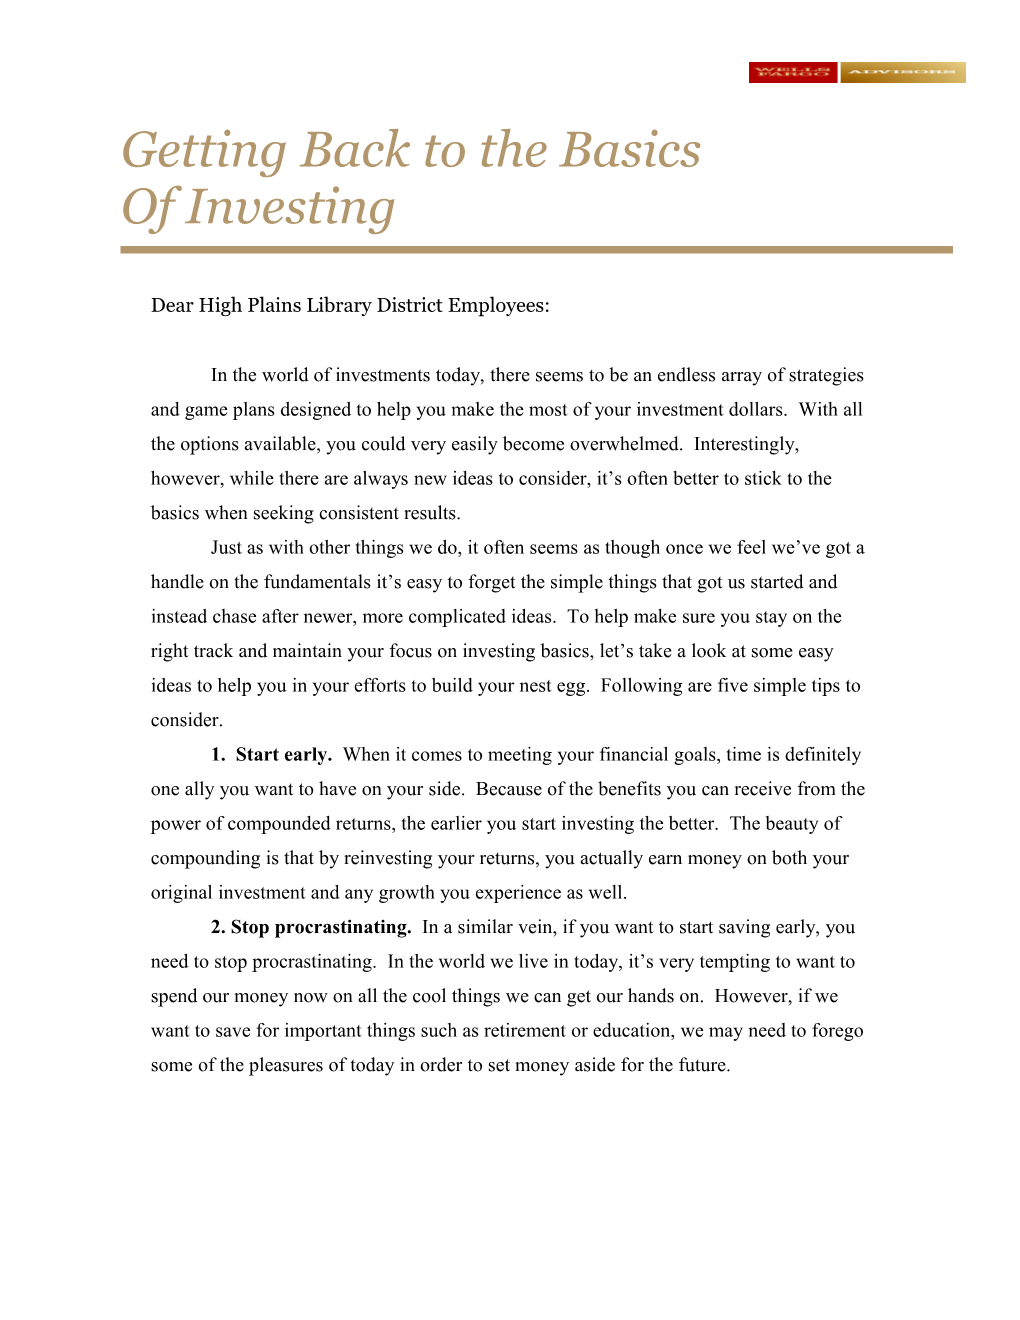 Getting Back to the Basics of Investing